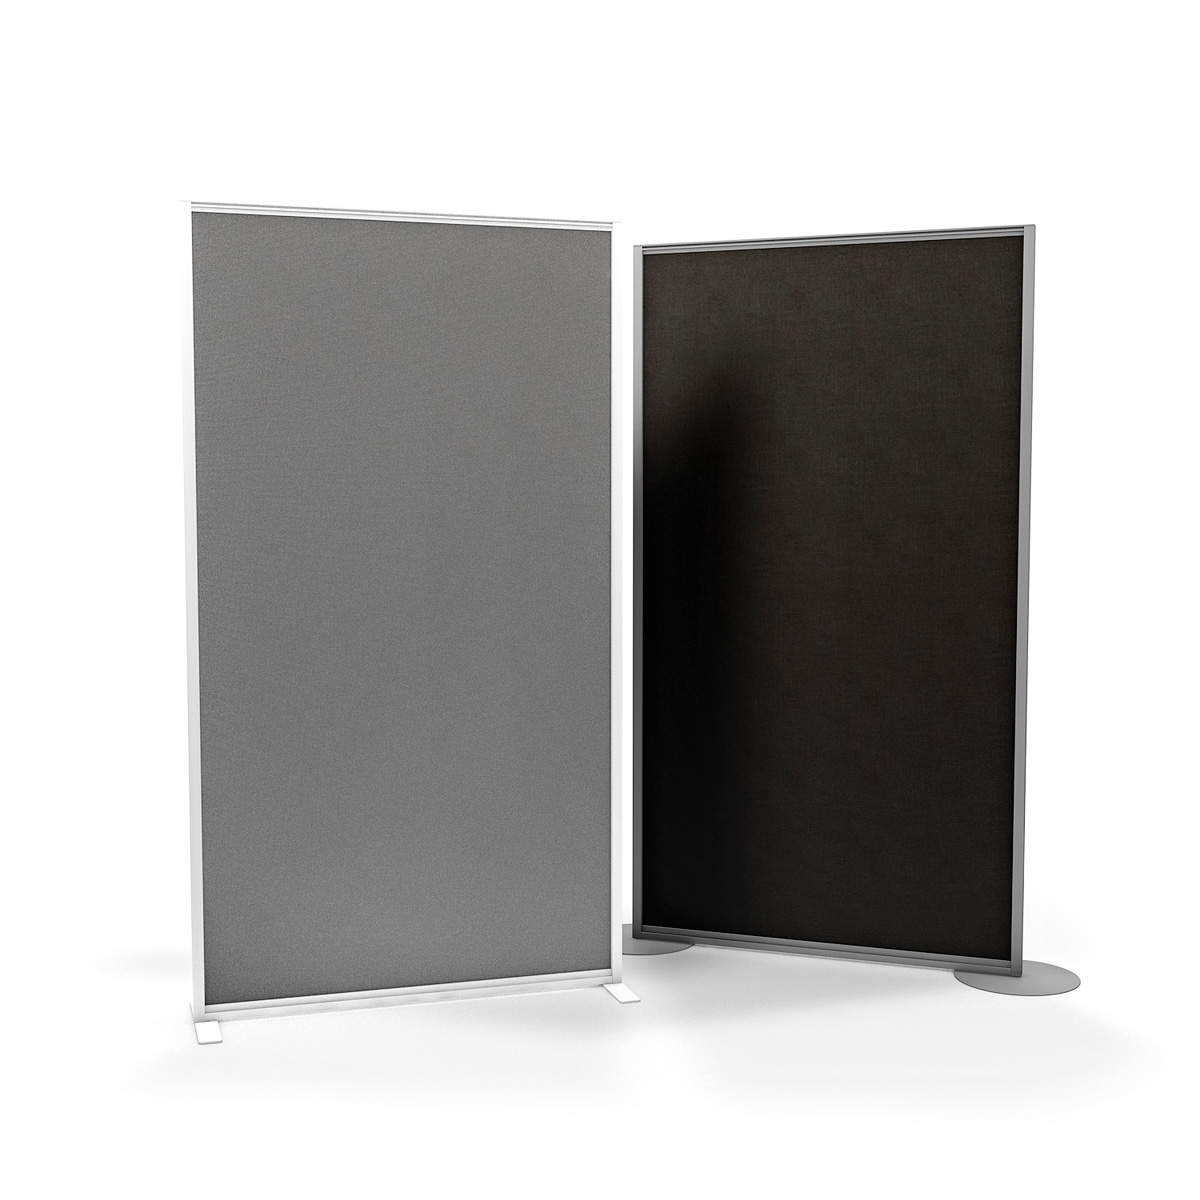 FRONTIER<sup>®</sup> Acoustic Panel Screens Freestanding Partitions